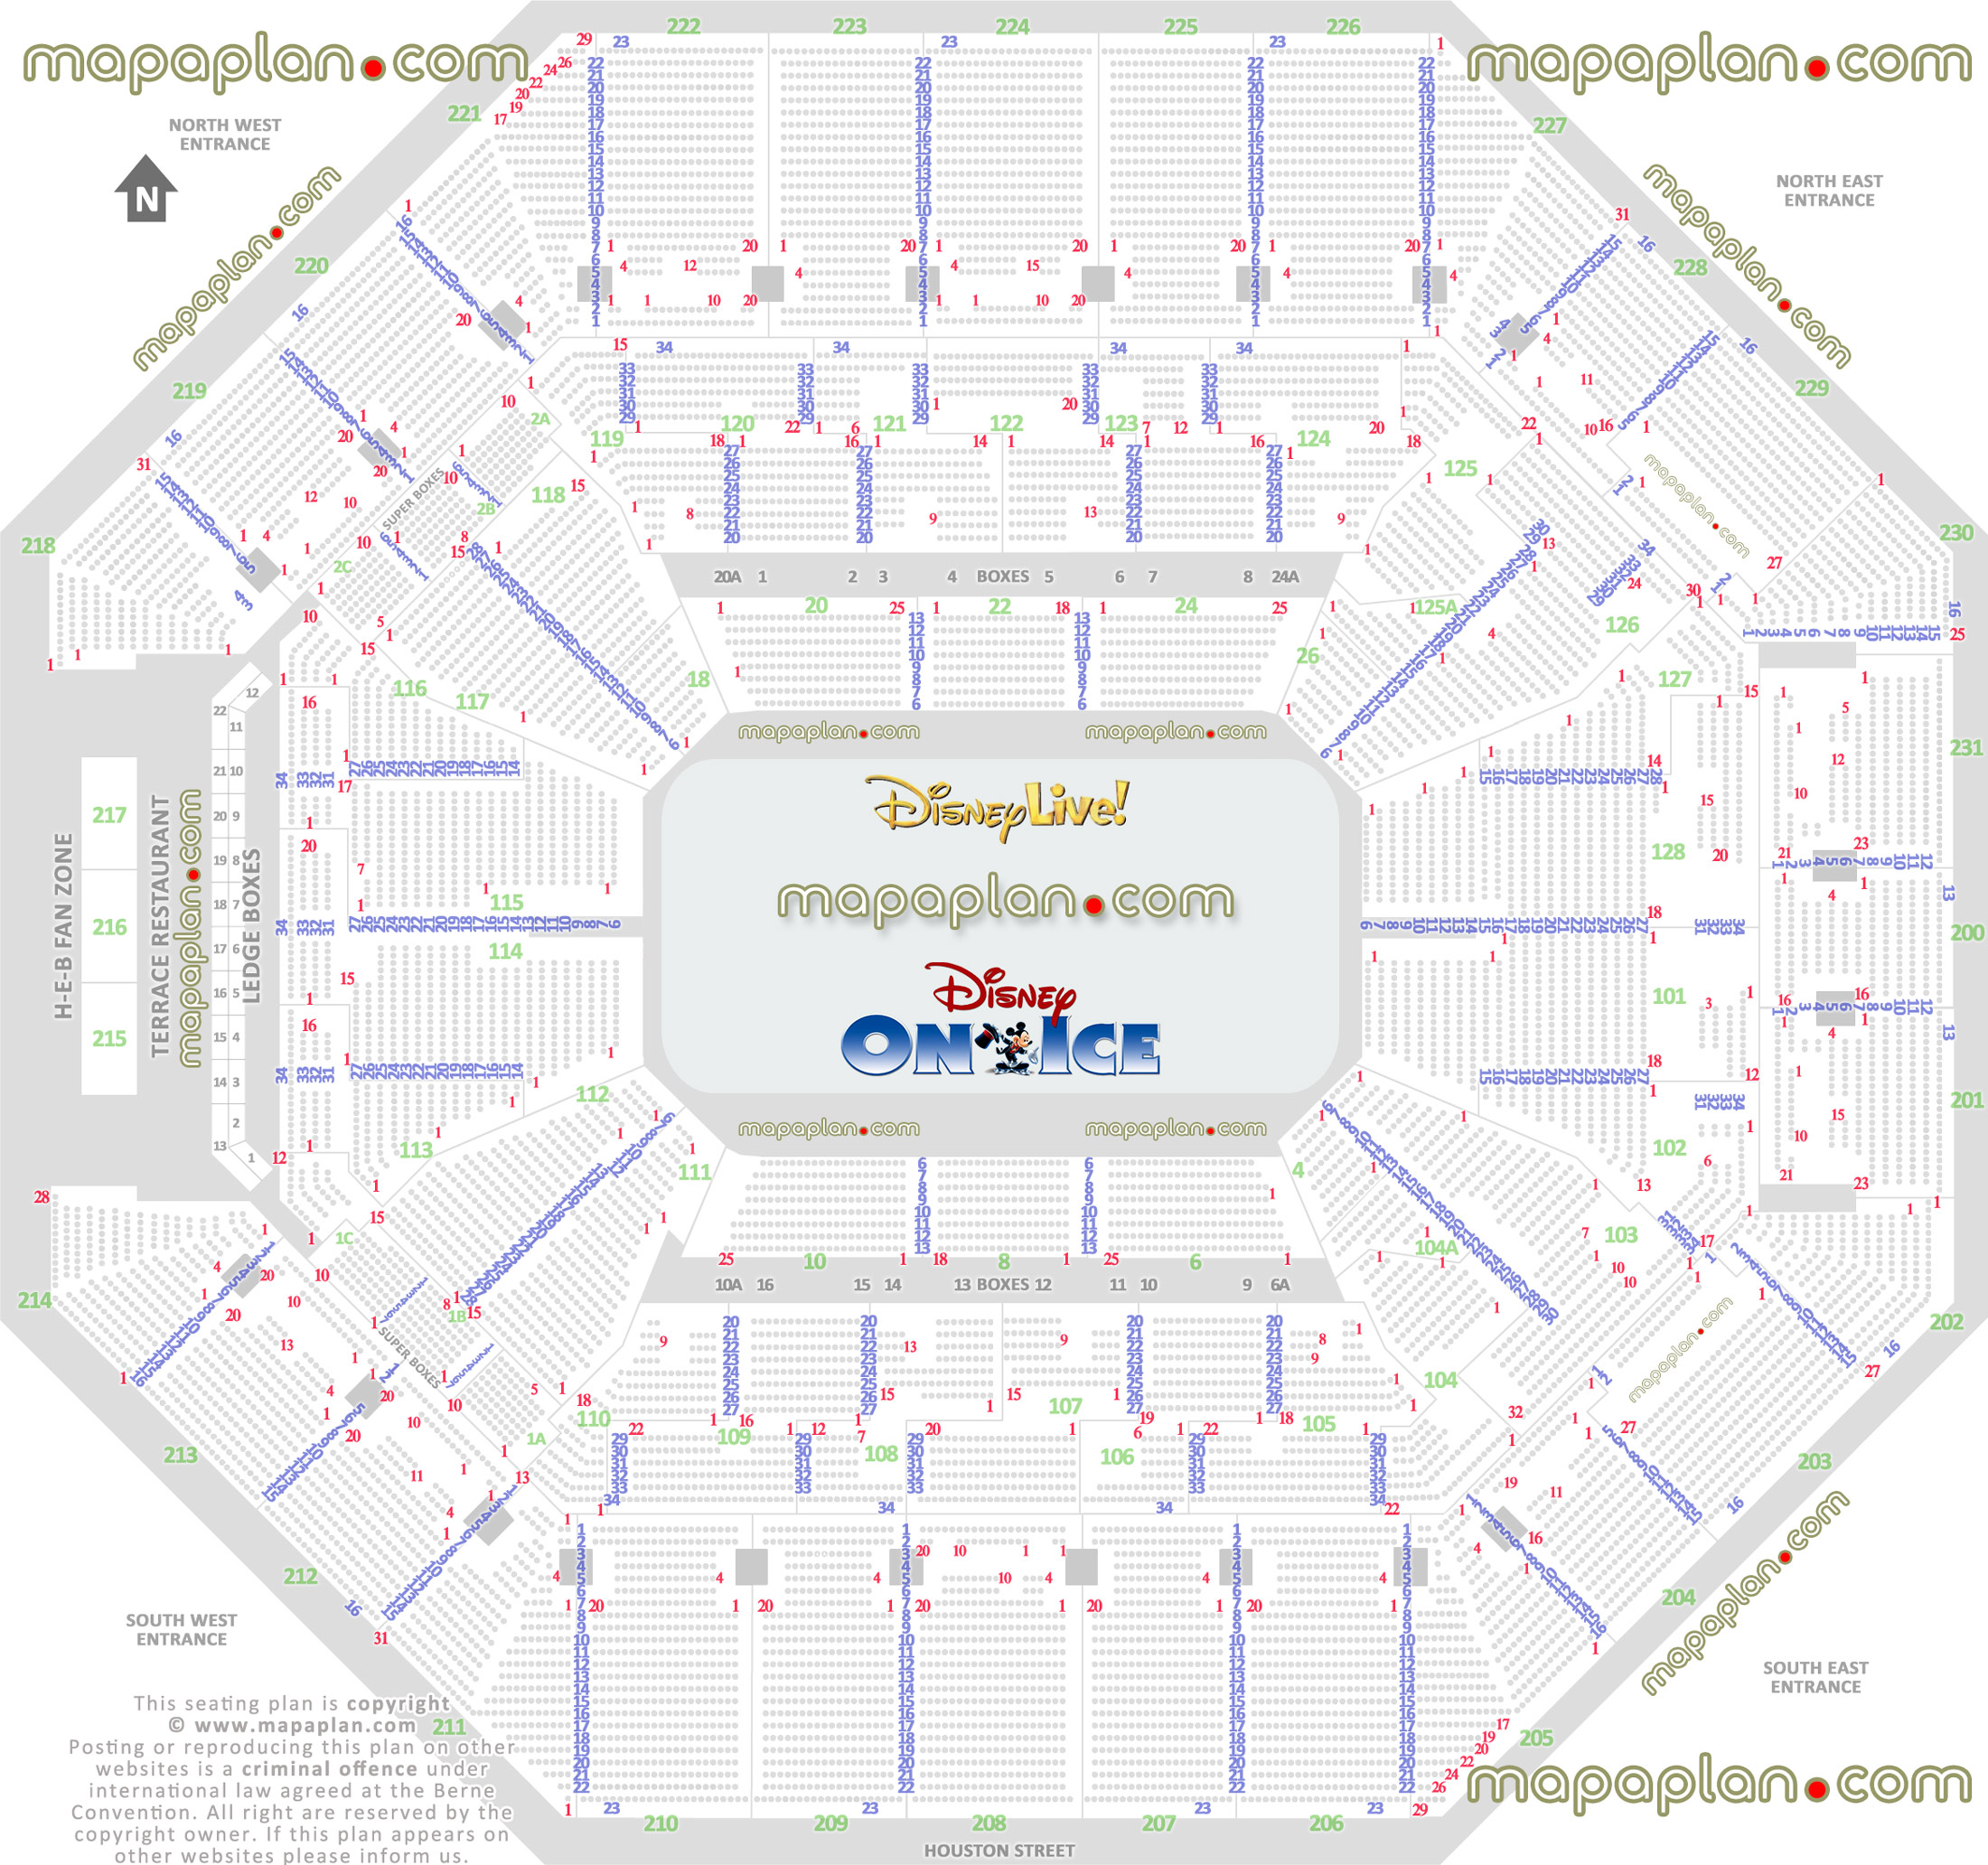 disney live disney ice arena chart best seat finder 3d tool precise detailed aisle seat row numbering location data plan ice rink event floor level charter plaza lower concourse upper balcony terrace seating San Antonio AT&T Center seating chart